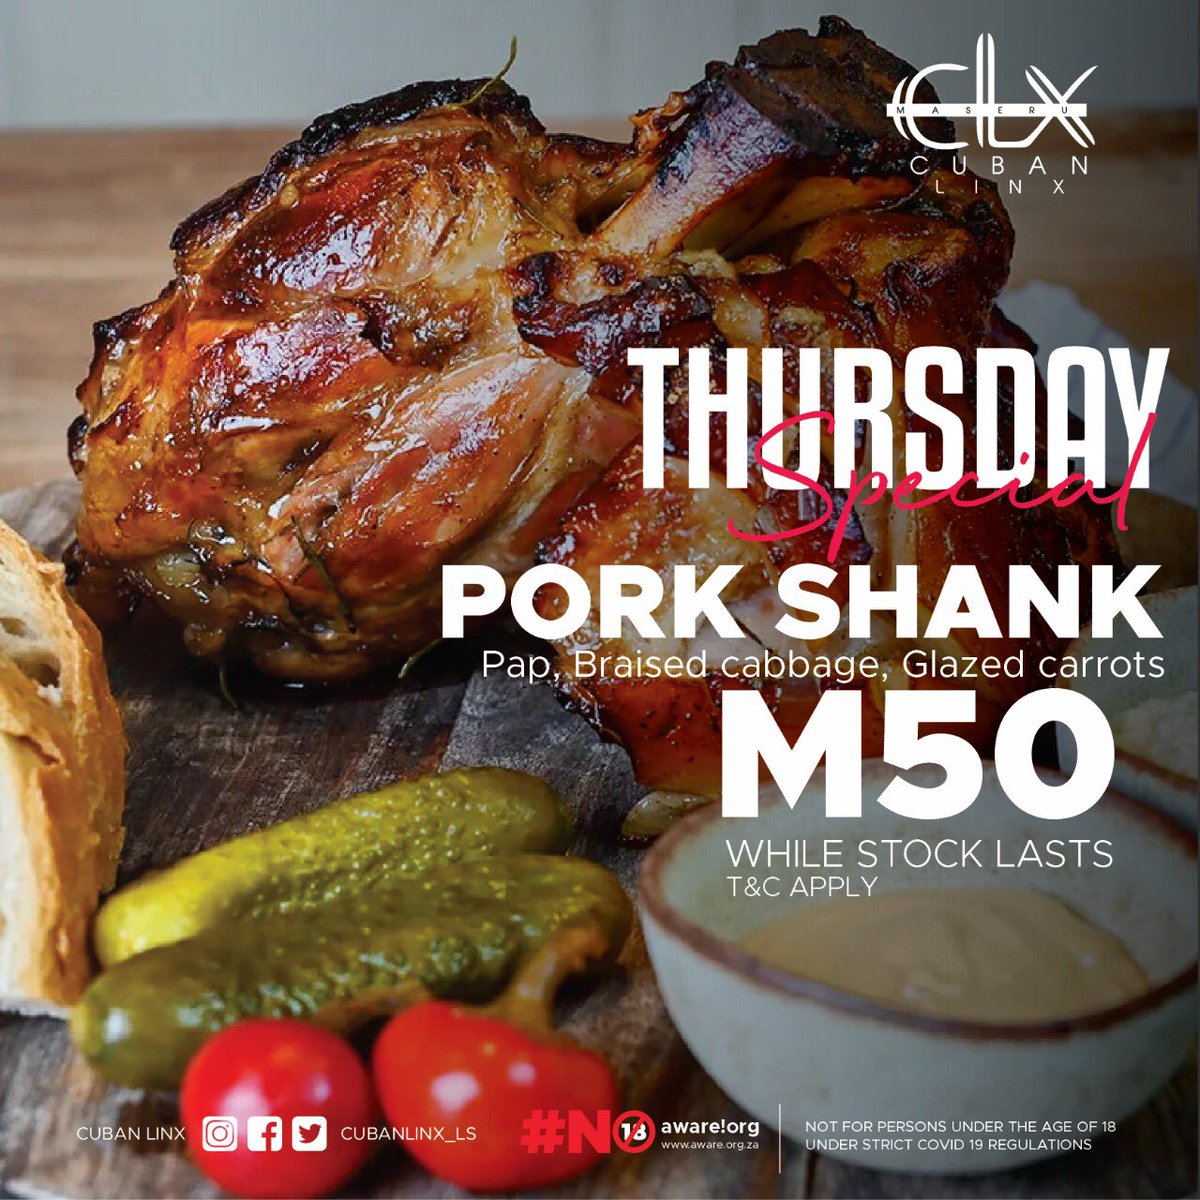 #lstwitter, let us take you into the weekend with fresh naija vibe sounds with 3 of the best naija djs in the country. @AllWhitePartyLS , @Nine24_LS and Ebonics. We’re  also serving a mean pork shank for lunch so come through.#ustlive 🔥